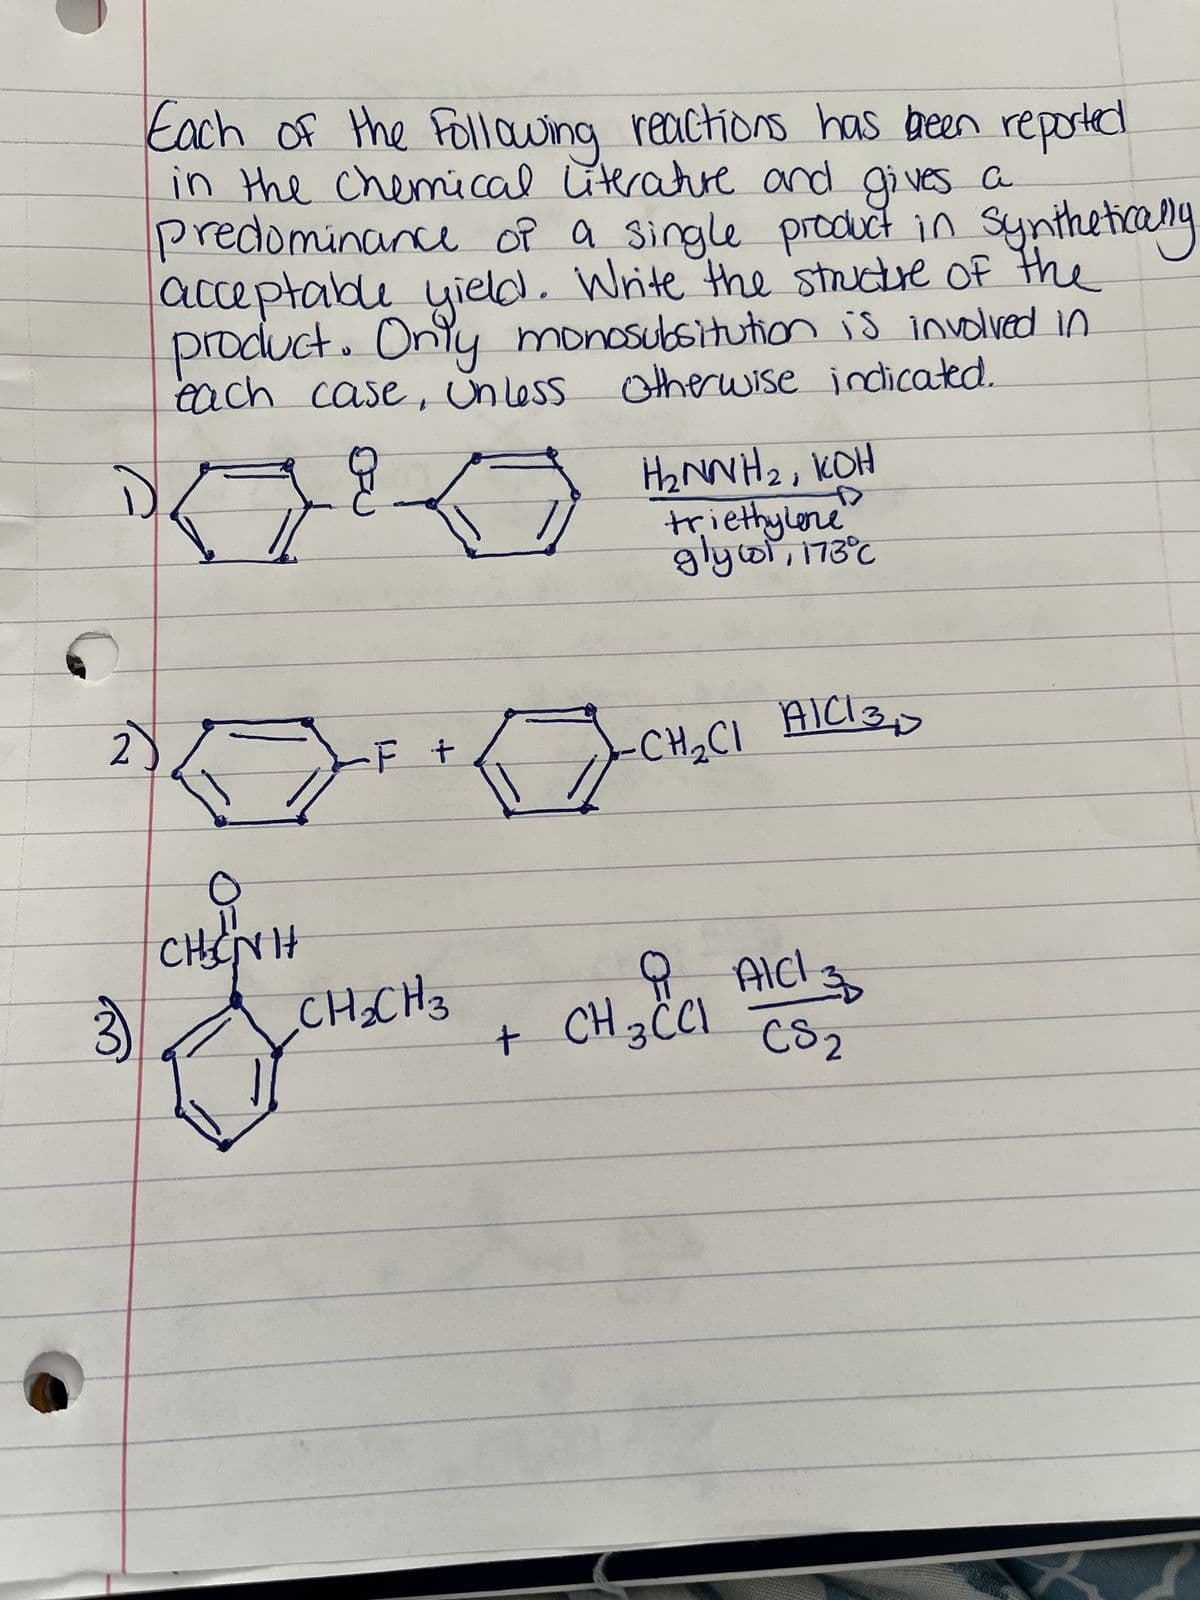 3)
Each of the following reactions has been reported
in the chemical literature and gives a
predominance of a single product in synthetically
acceptable yield. Write the structure of the
product. Only monosubsitution is involved in
each case, unless otherwise indicated.
K
CHÍNH
-F +
CH₂CH3
E
+
Đ
H₂NNH₂, KOH
triethylene
glycol, 173°C
-CH₂CI AICI 30
CH₂ CCI AICI 30
CS2